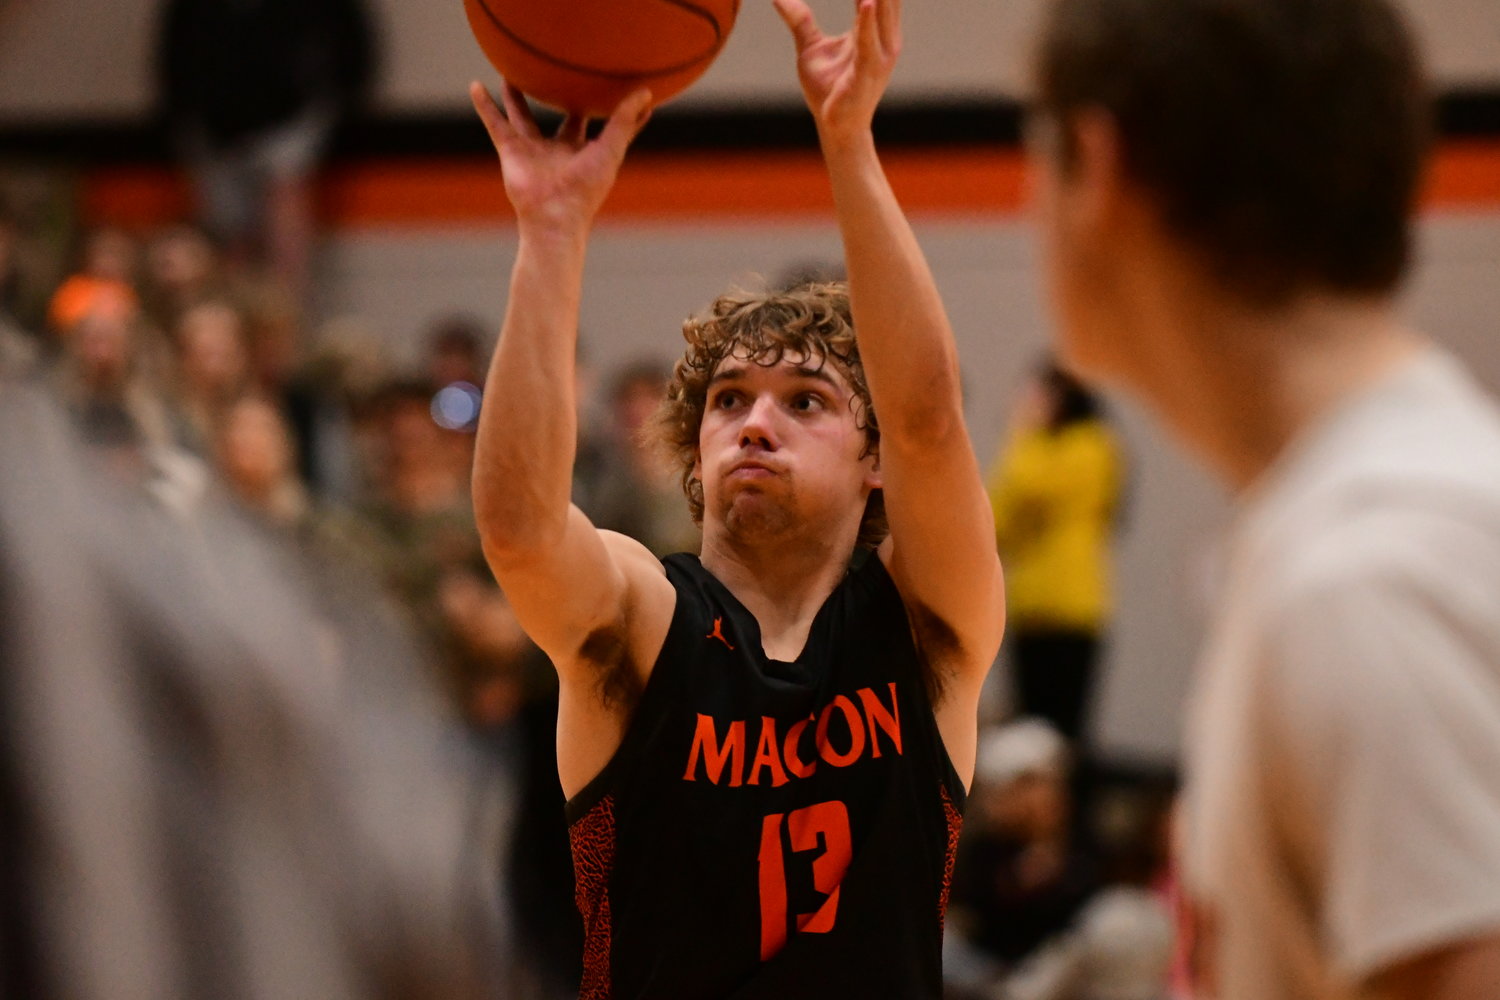 Action from Tuesday's boys basketball game between Kirksville and Macon.